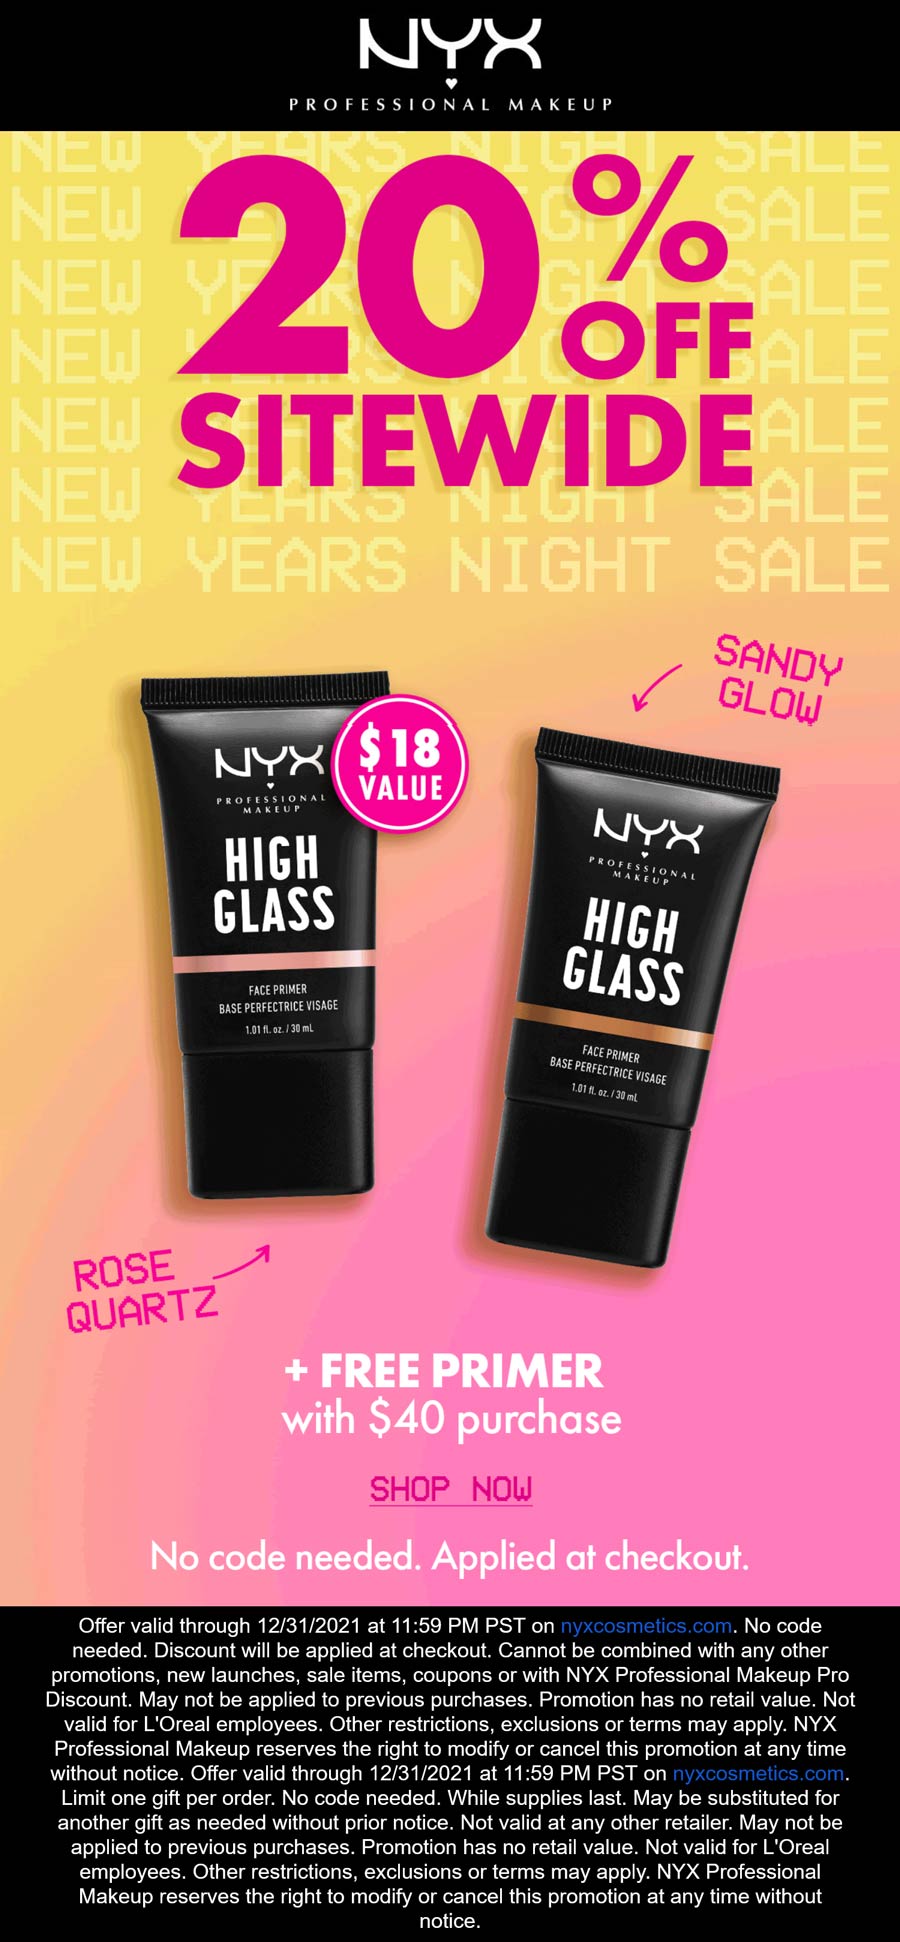 NYX Professional Makeup stores Coupon  20% off everything + free primer on $40 online today at NYX Professional Makeup #nyxprofessionalmakeup 